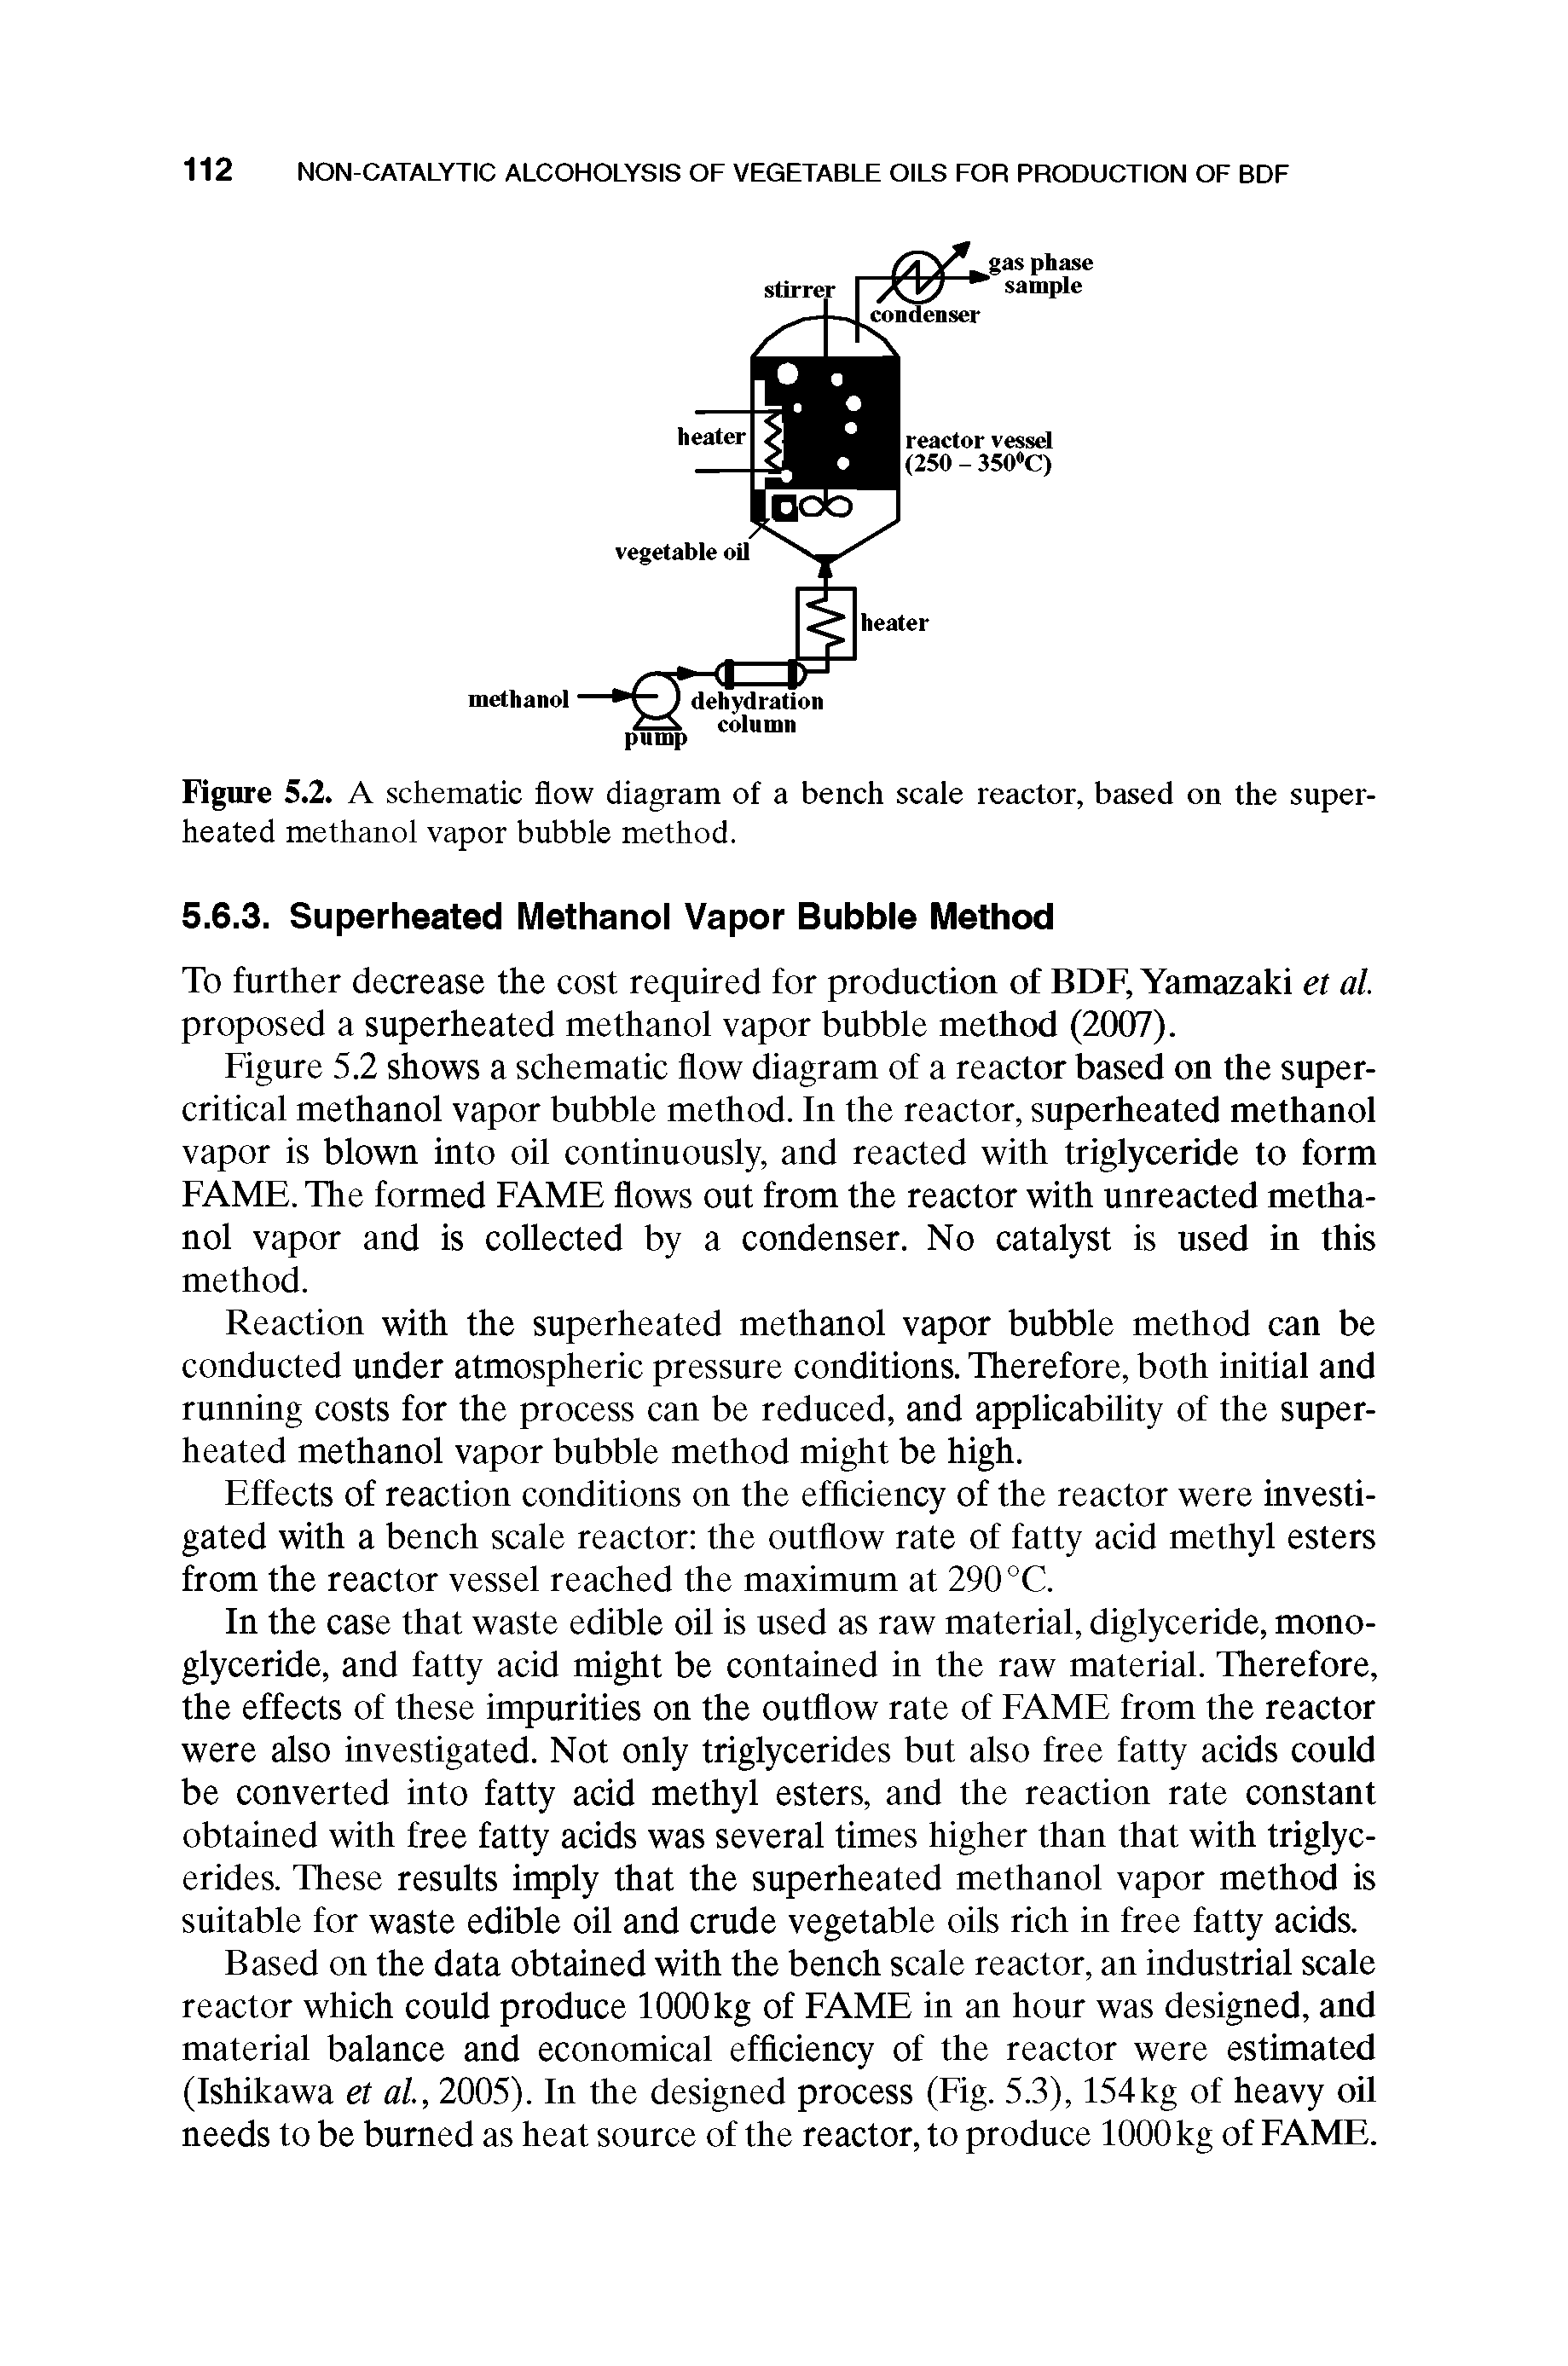 Figure 5.2. A schematic flow diagram of a bench scale reactor, based on the superheated methanol vapor bubble method.